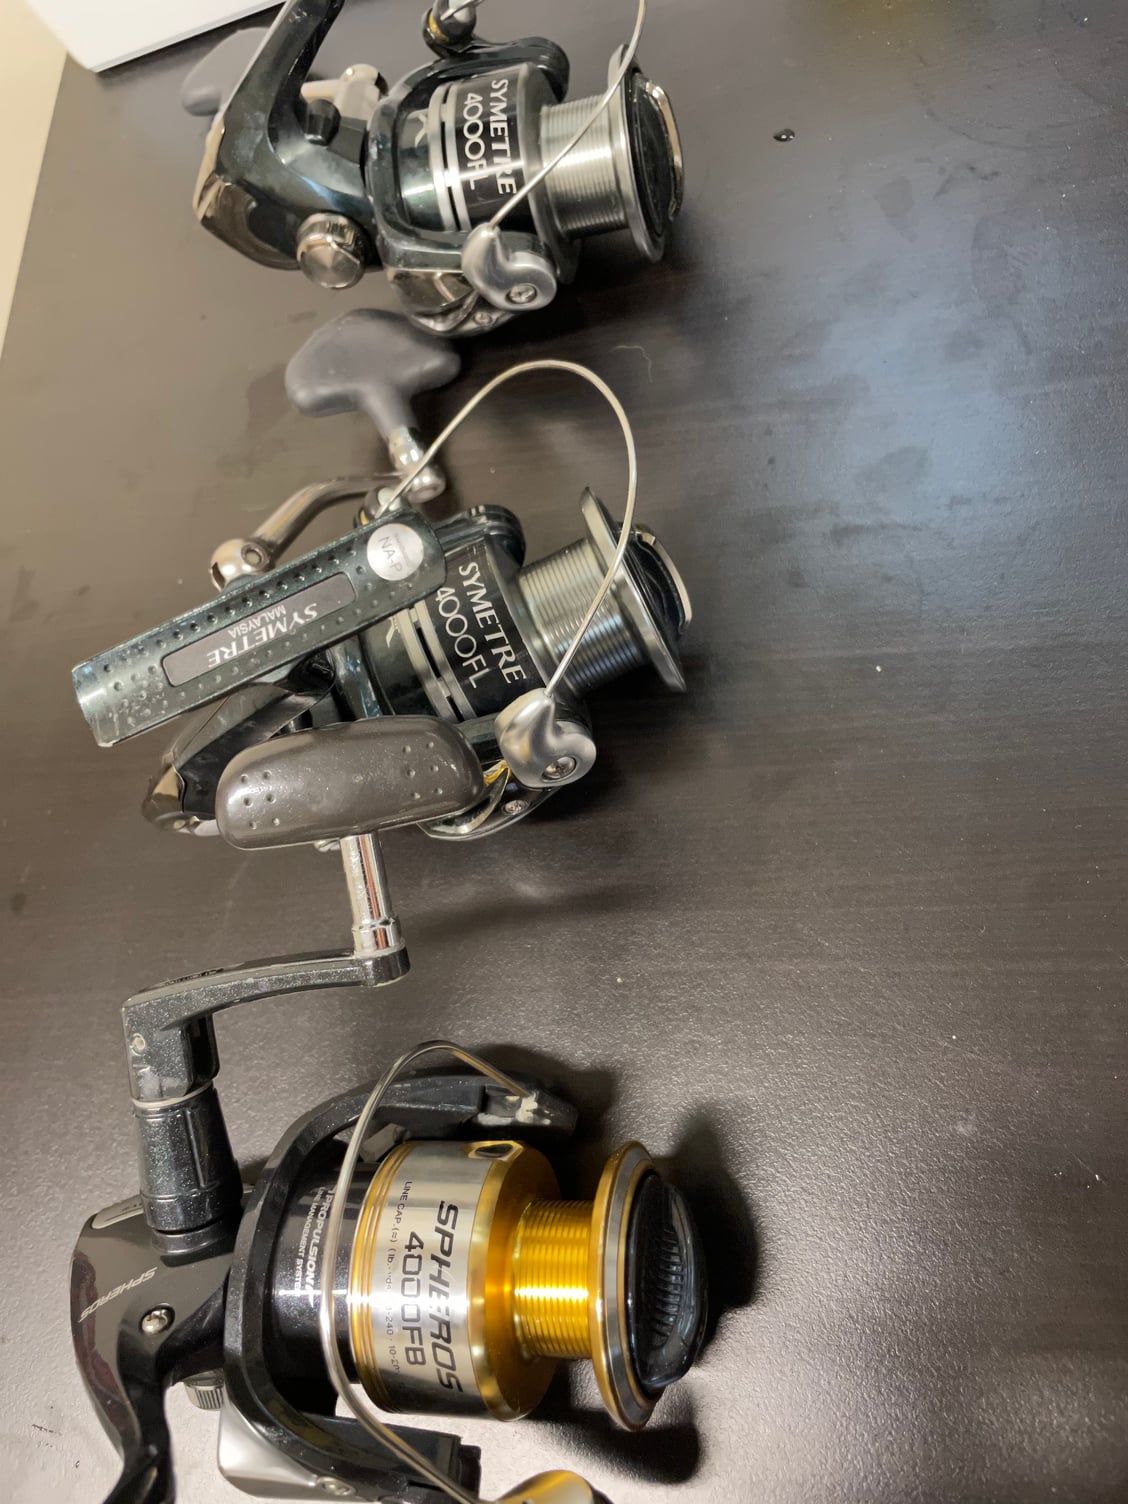 Shimano inshore reels for sale - The Hull Truth - Boating and Fishing Forum